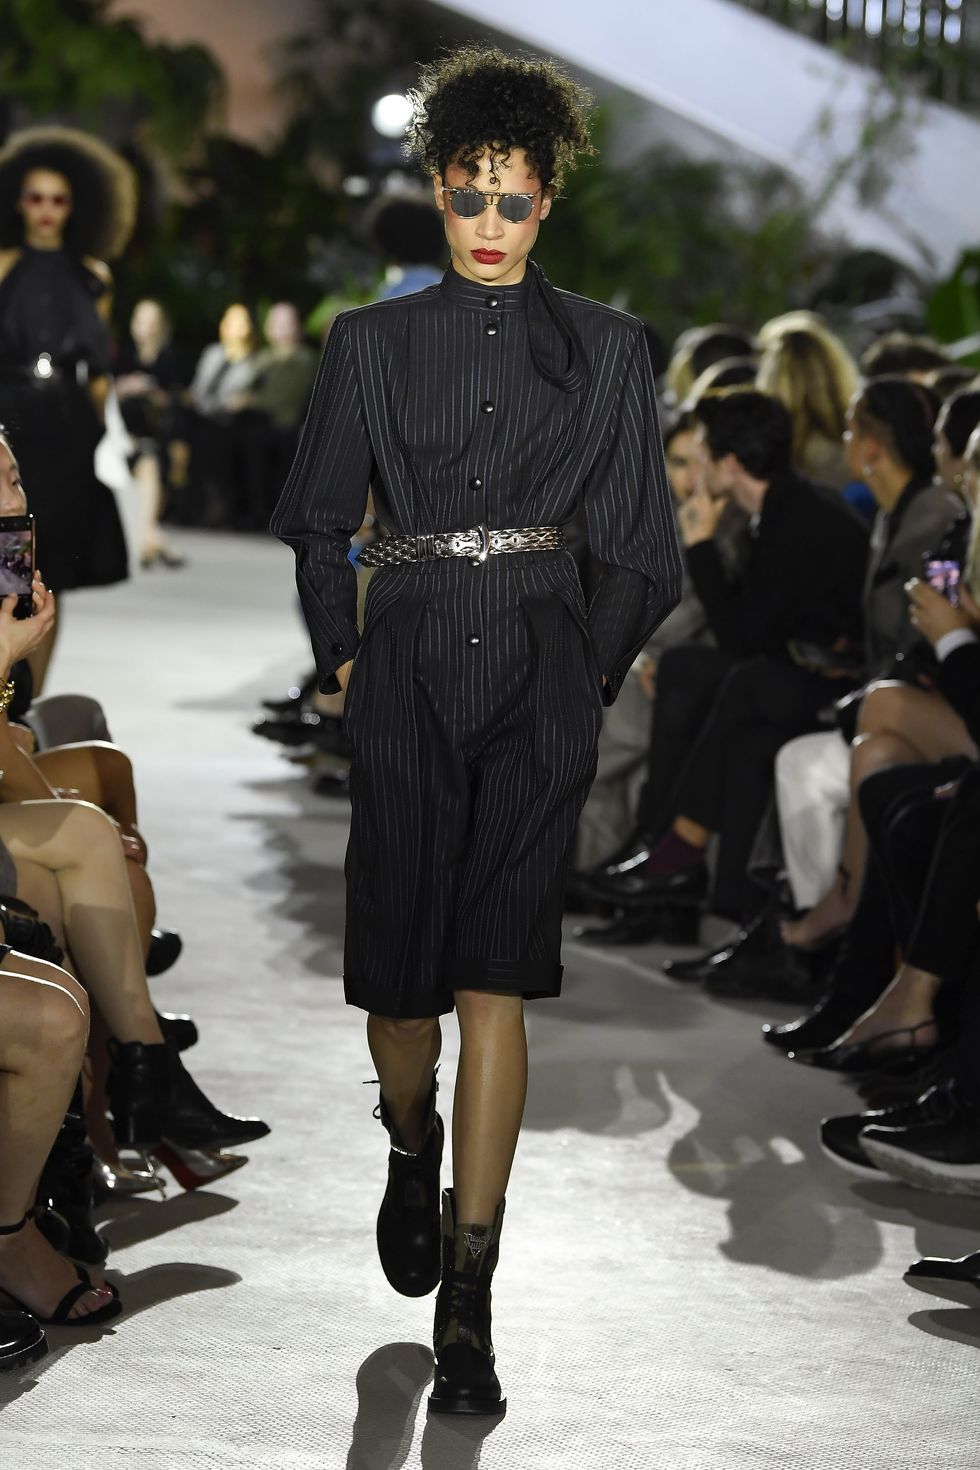 Heejung Park walks on the runway during the Louis Vuitton Resort 2020  Collection Fashion Show at TWA Terminal in JFK Airport in New York, NY on  May 8, 2019. (Photo by Jonas